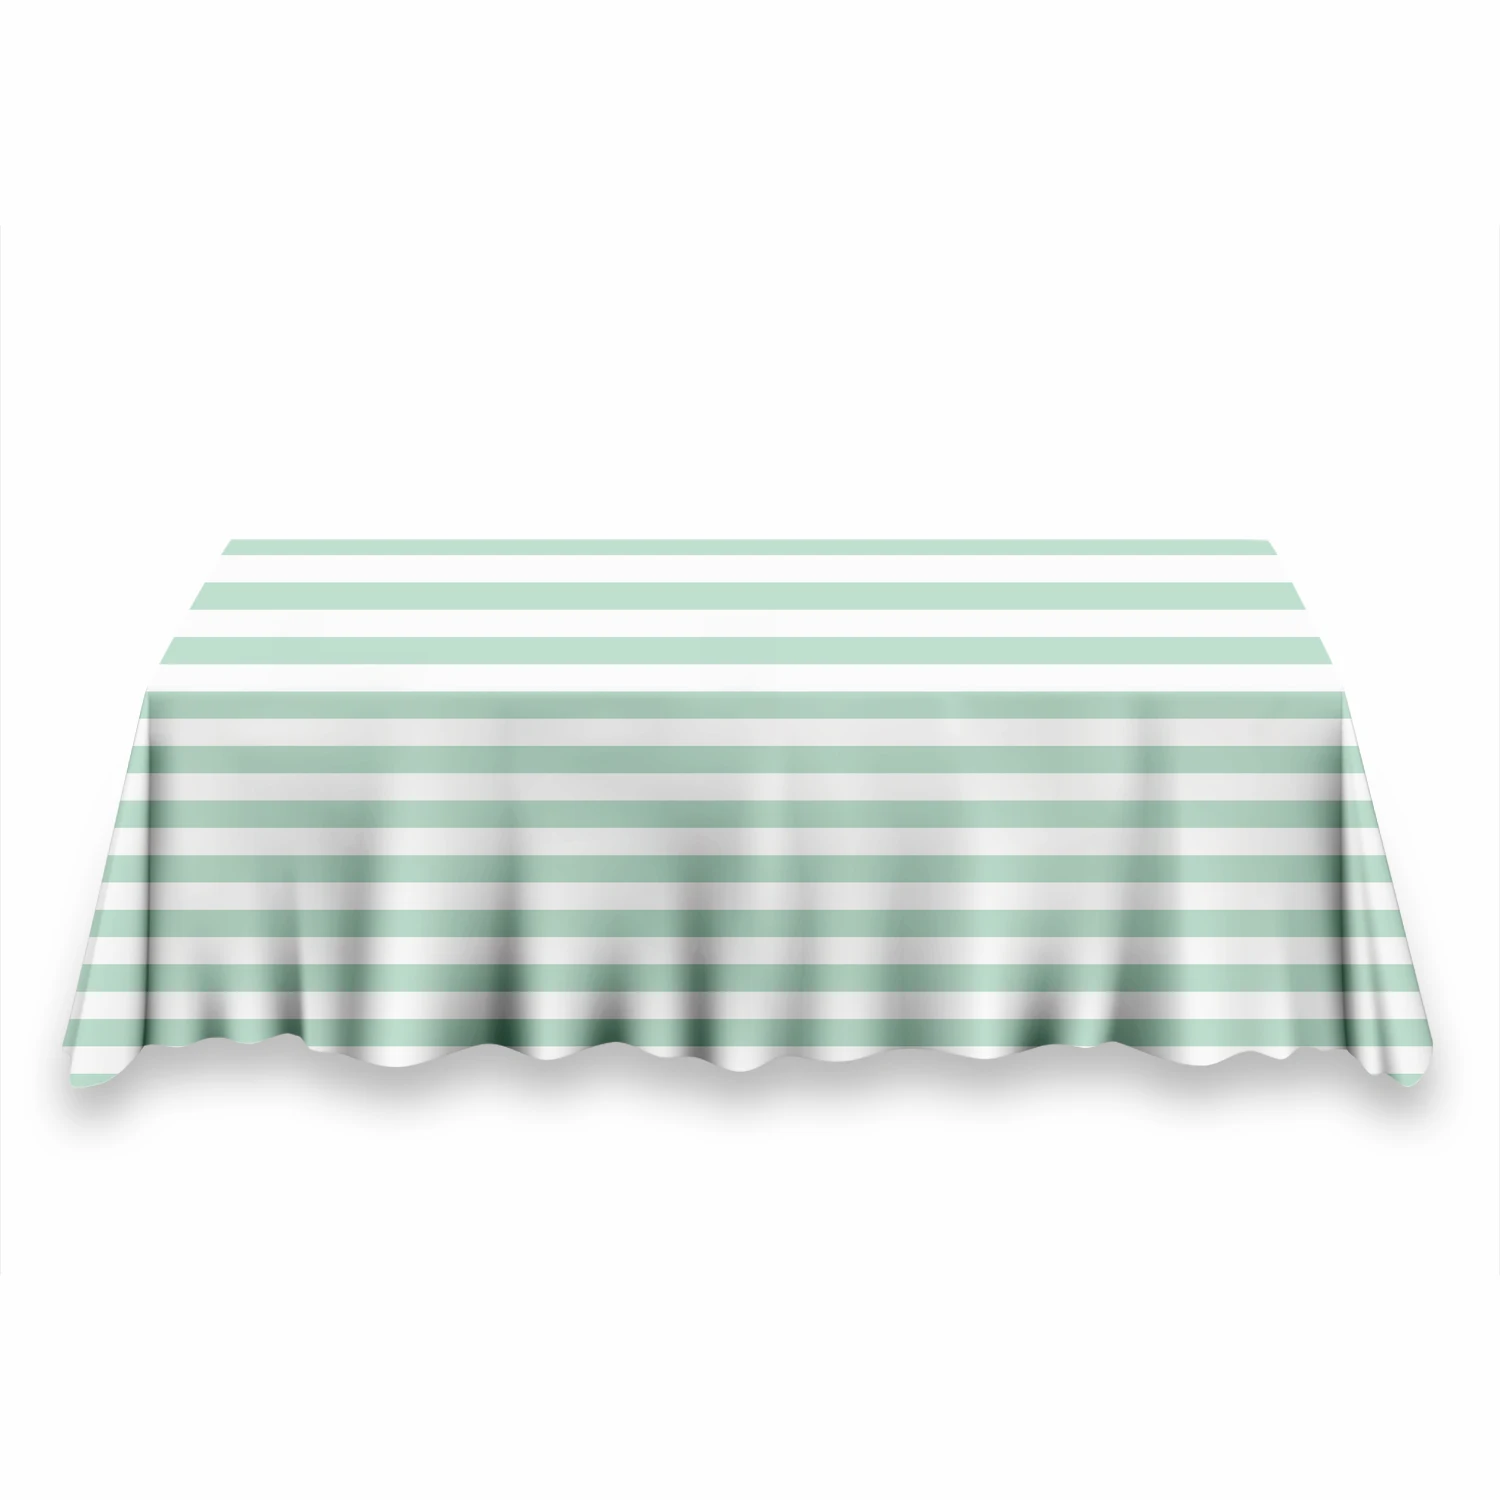 Party Backdrop & Table Cover Cloth Light Green Striped Pattern Photography Background Studio Baby Shower Supplies Tablecloths